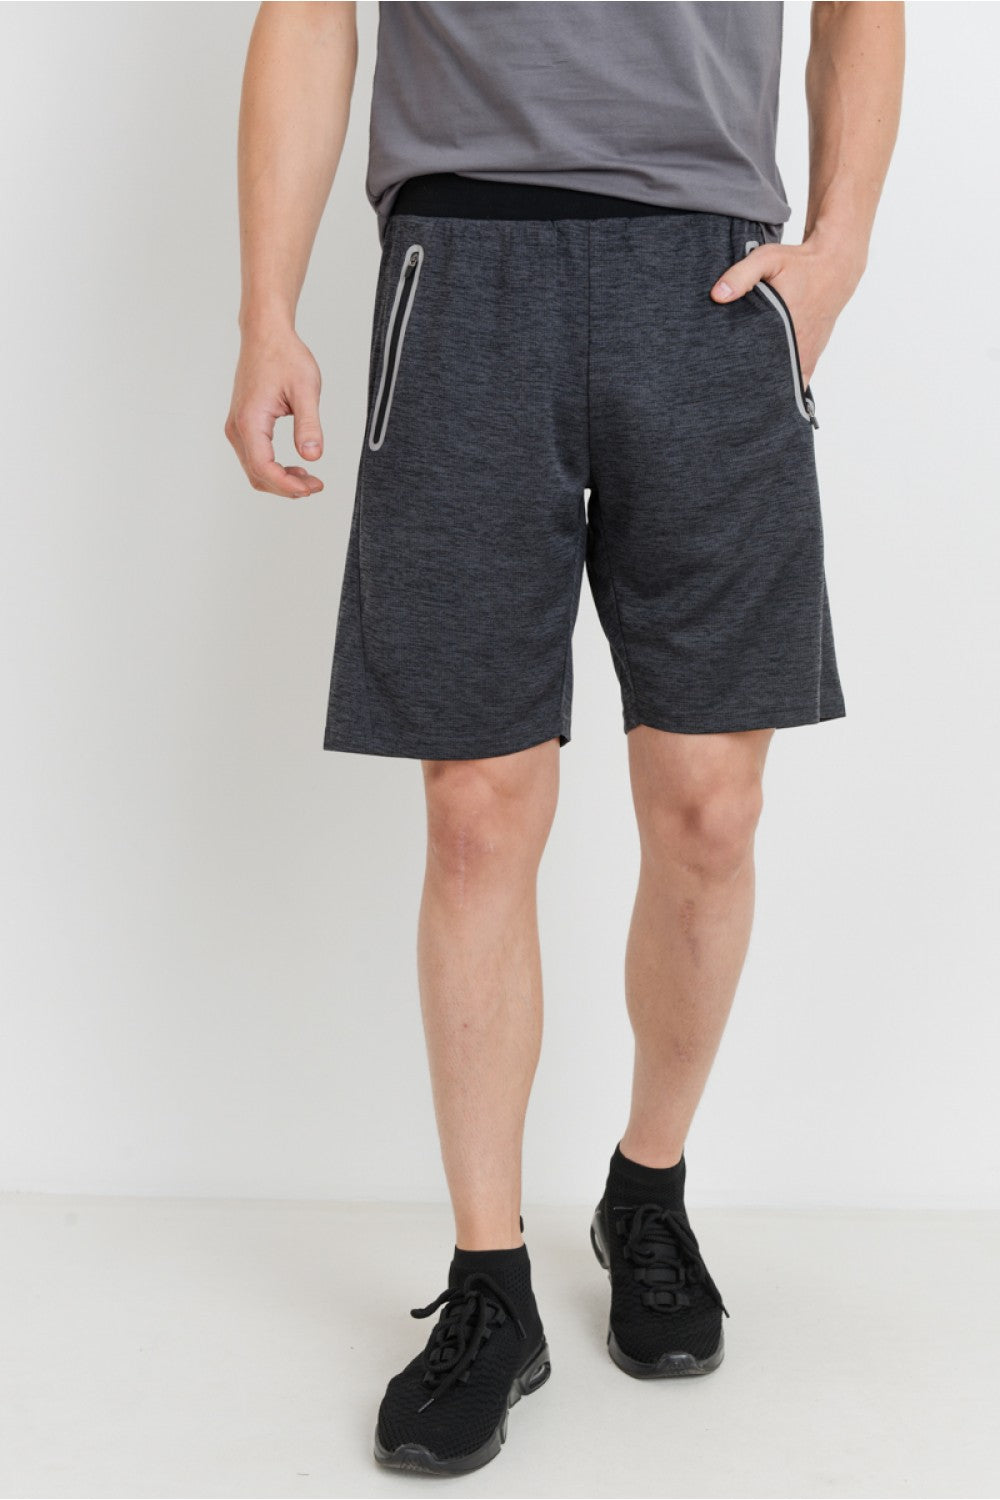 Athleisure Shorts with Zippered Pockets